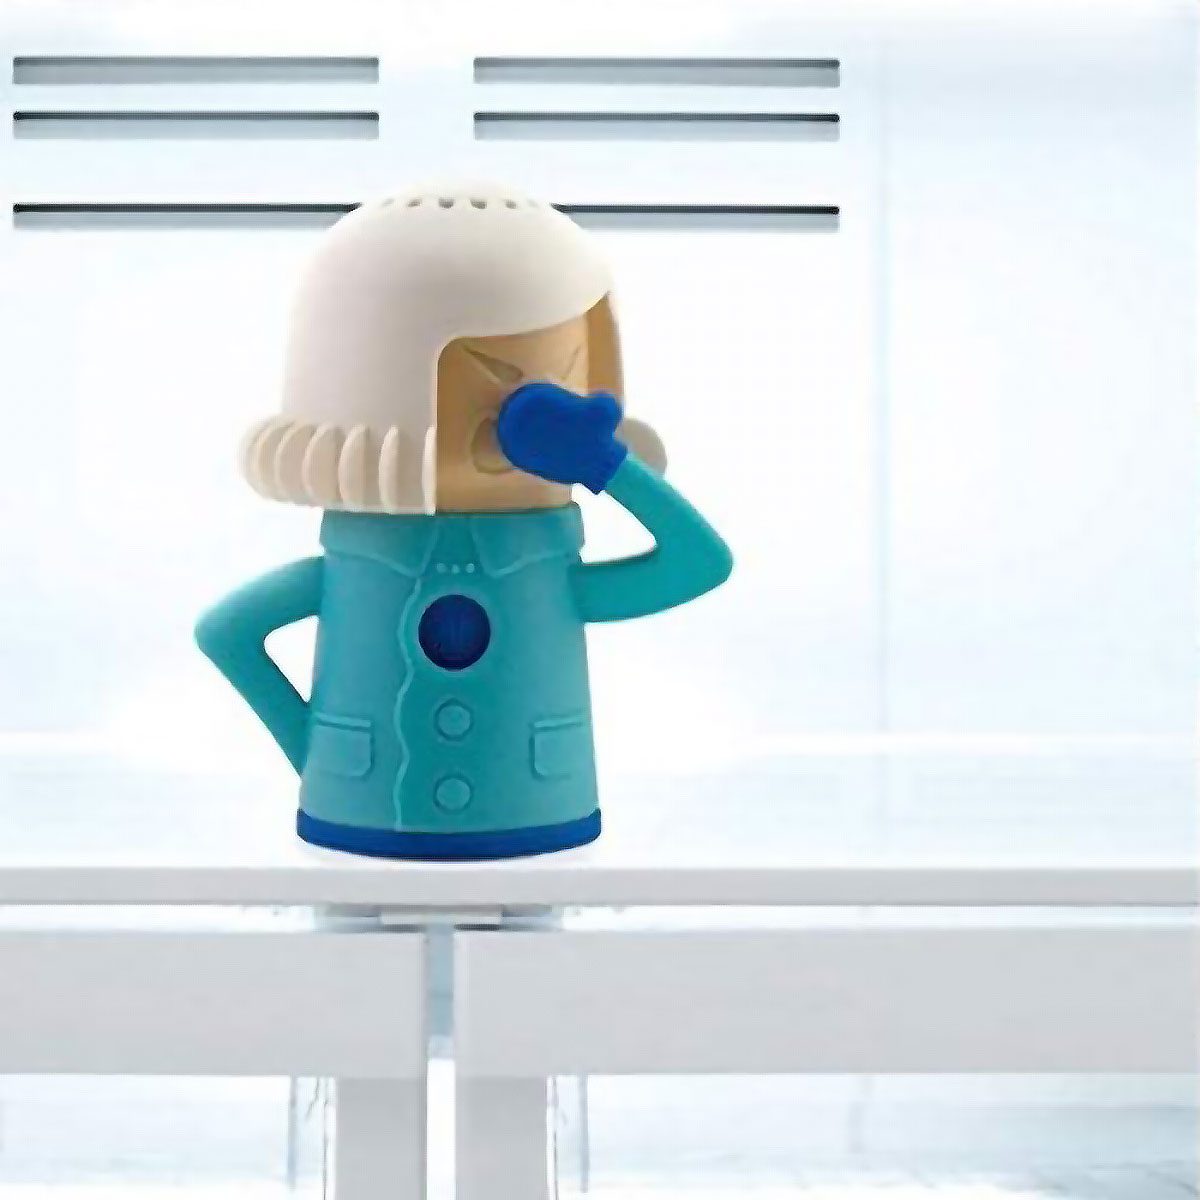 The Chilly Mama Fridge Odor Absorber Is a Genius  Find